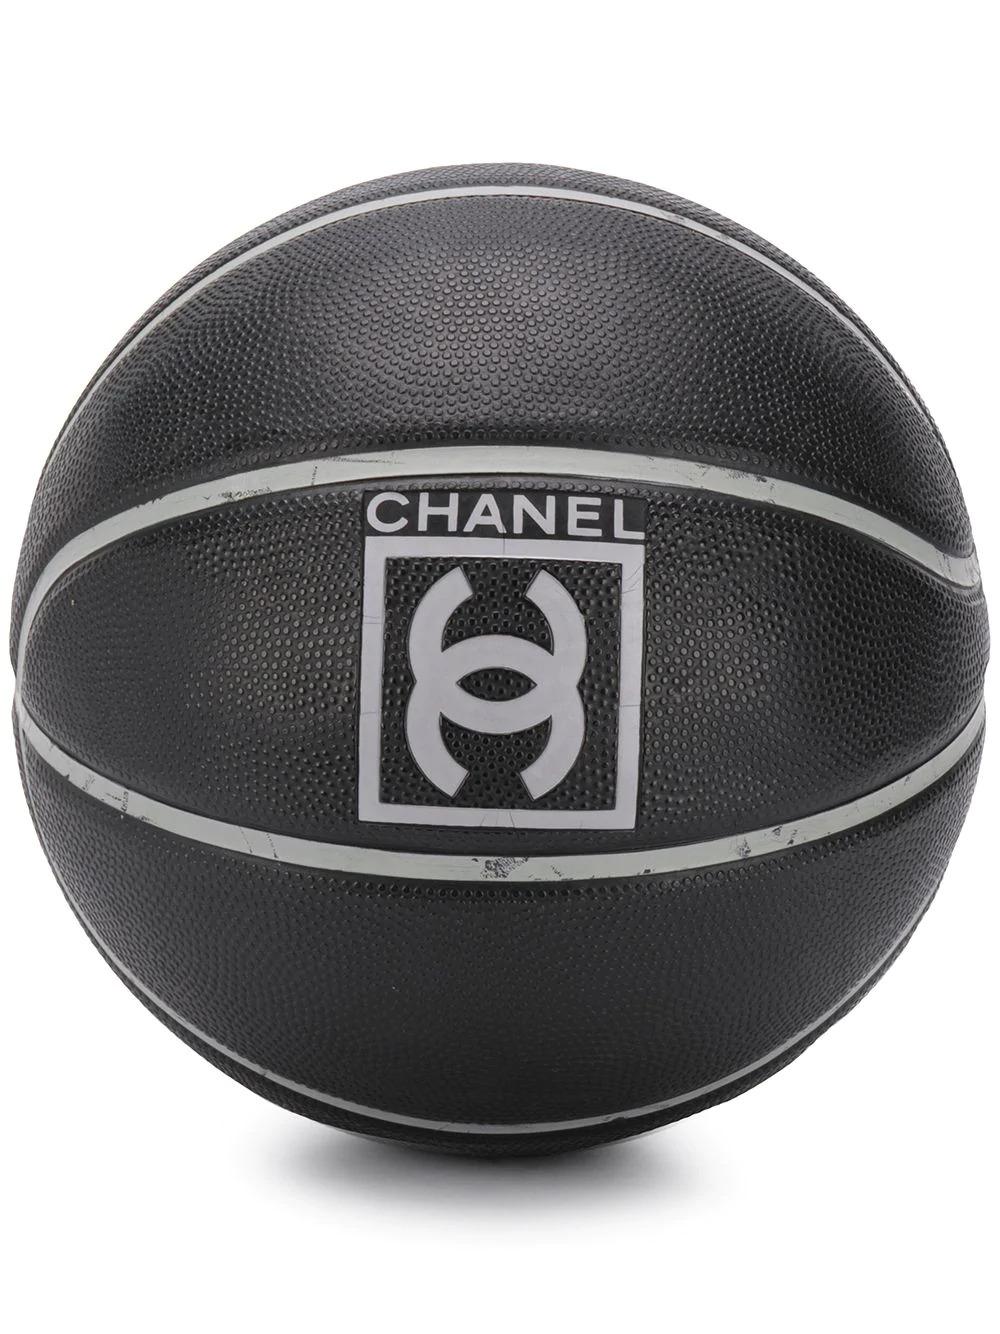 As seen on Kylie Jenner, this unique Basketball was crafted in 2004 from charcoal black synthetic rubber. Showcasing the brand's iconic interlocking 'CC' logo with contrasting off-white detailing, this limited edition pre-owned ball from Chanel is a